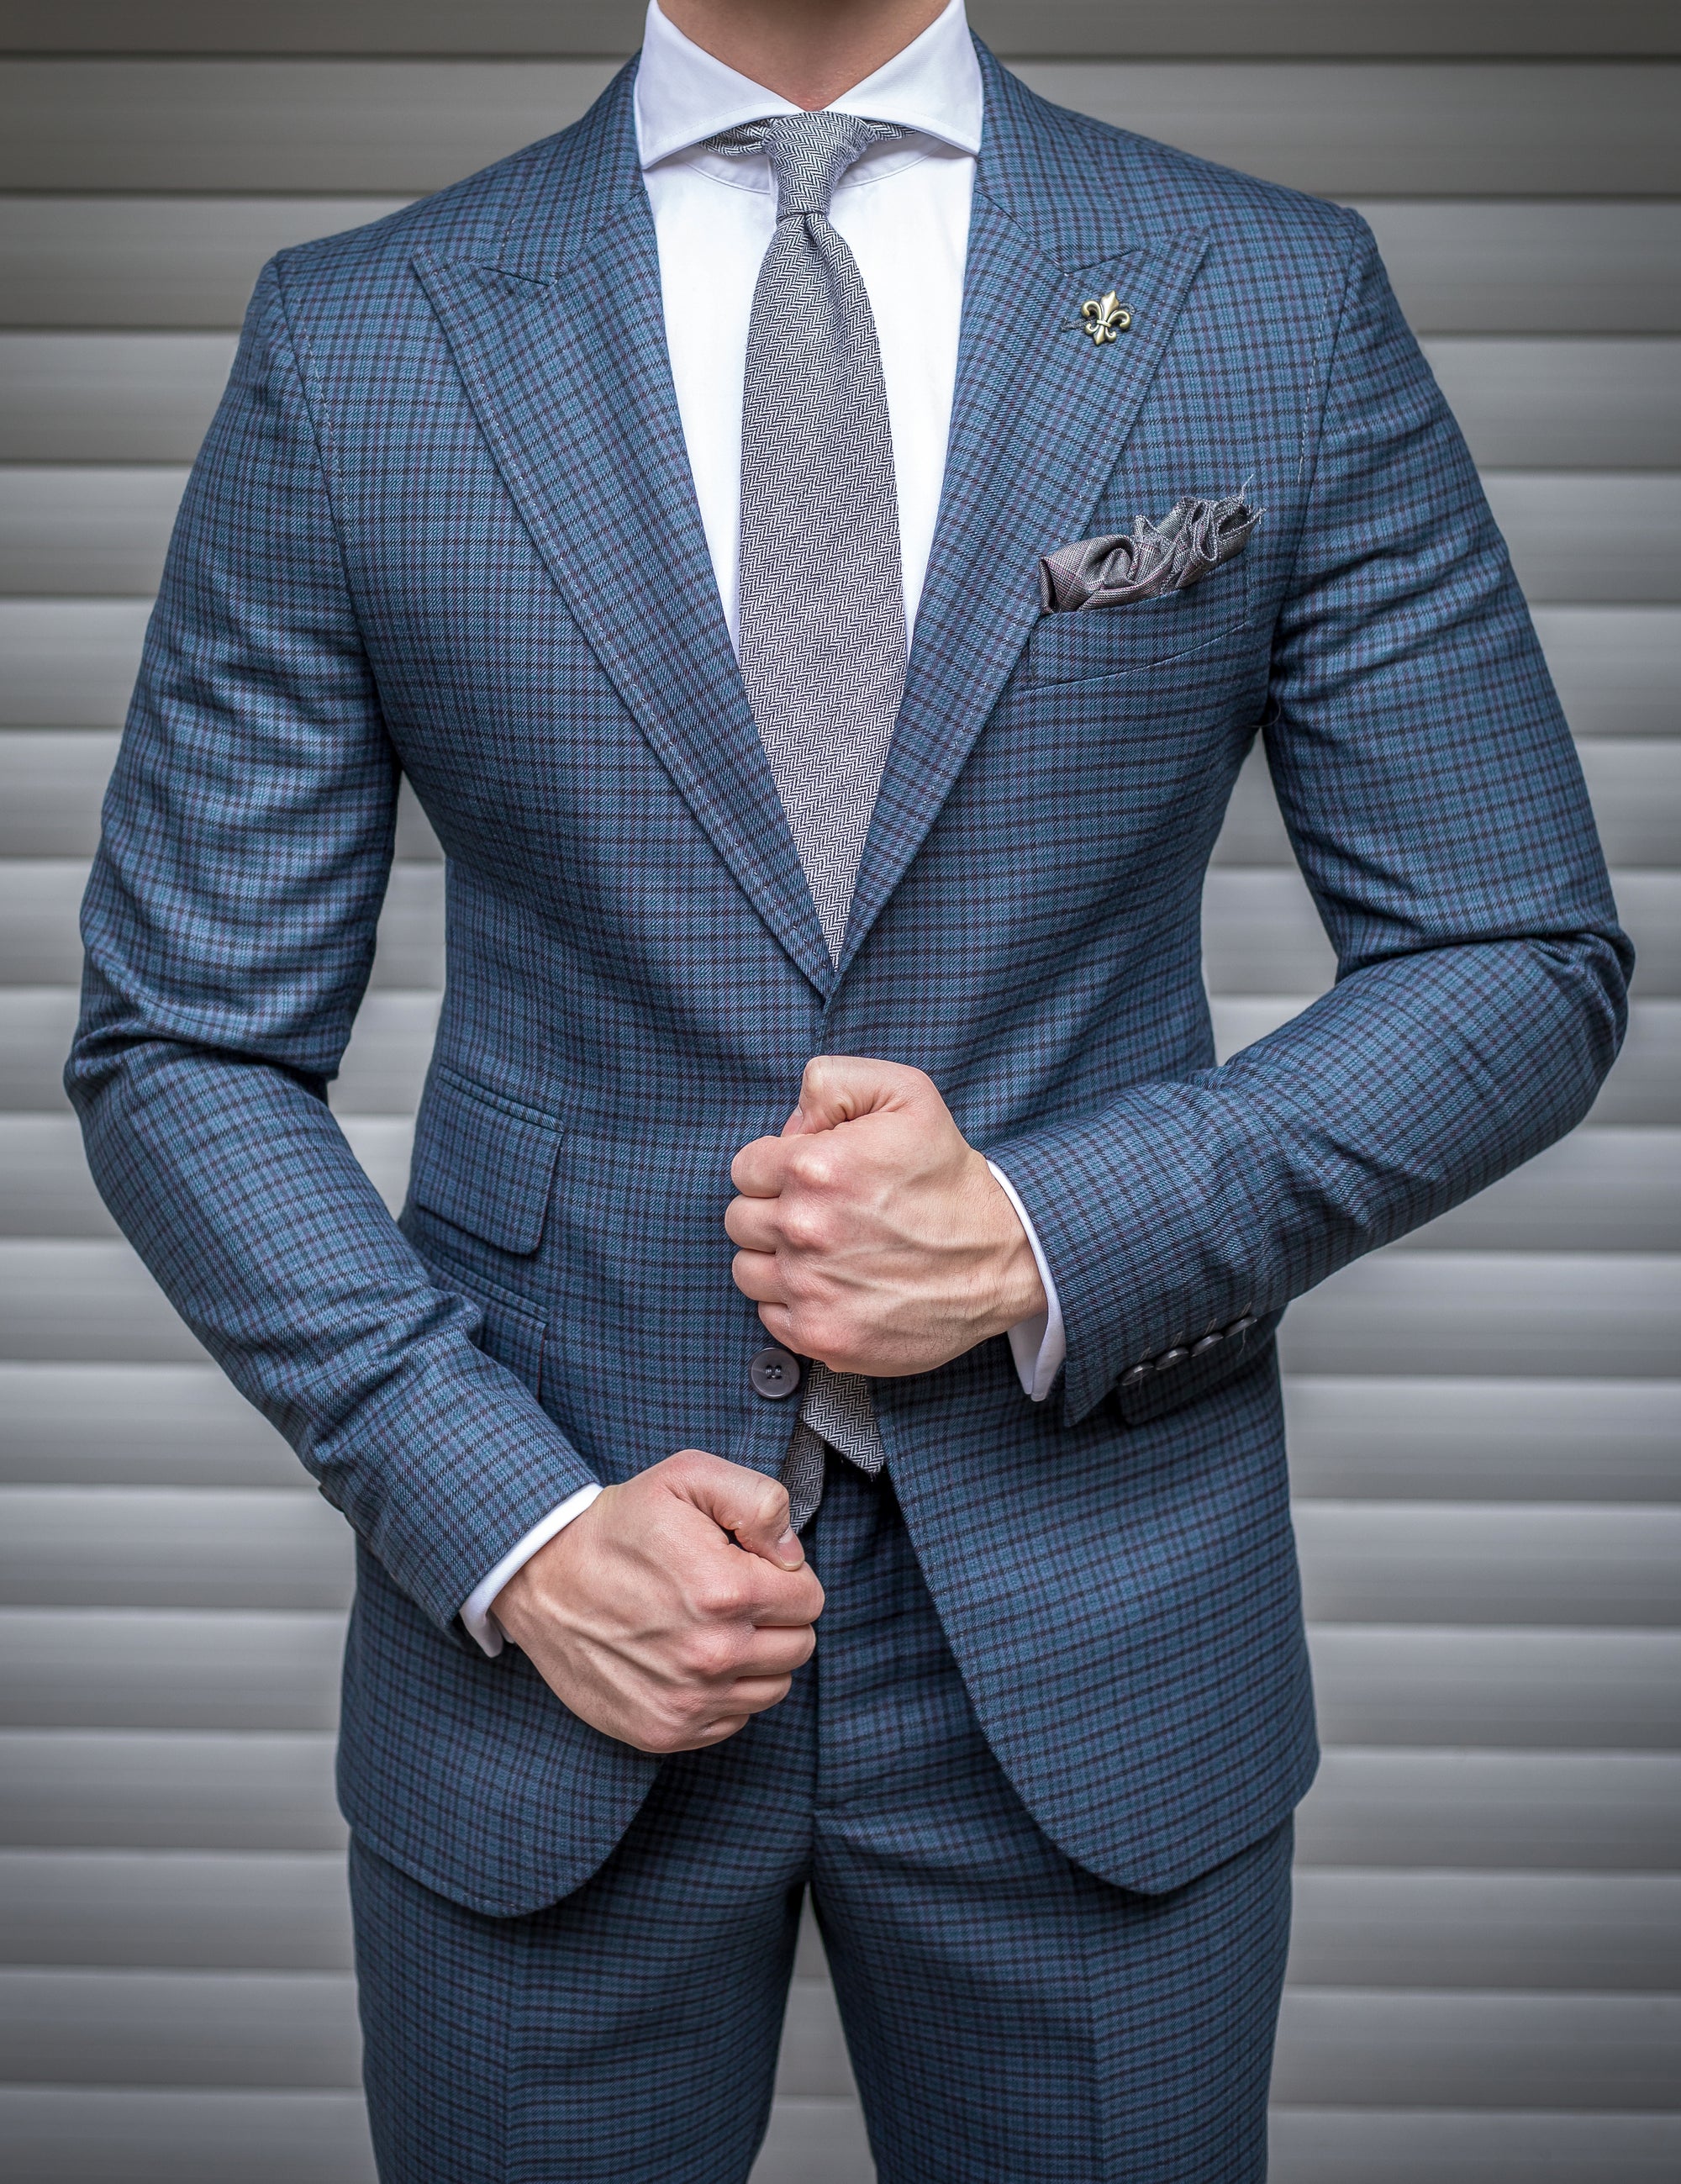 "Why Invest in a Custom Suit" Published by the Where What When March 2020 Issue